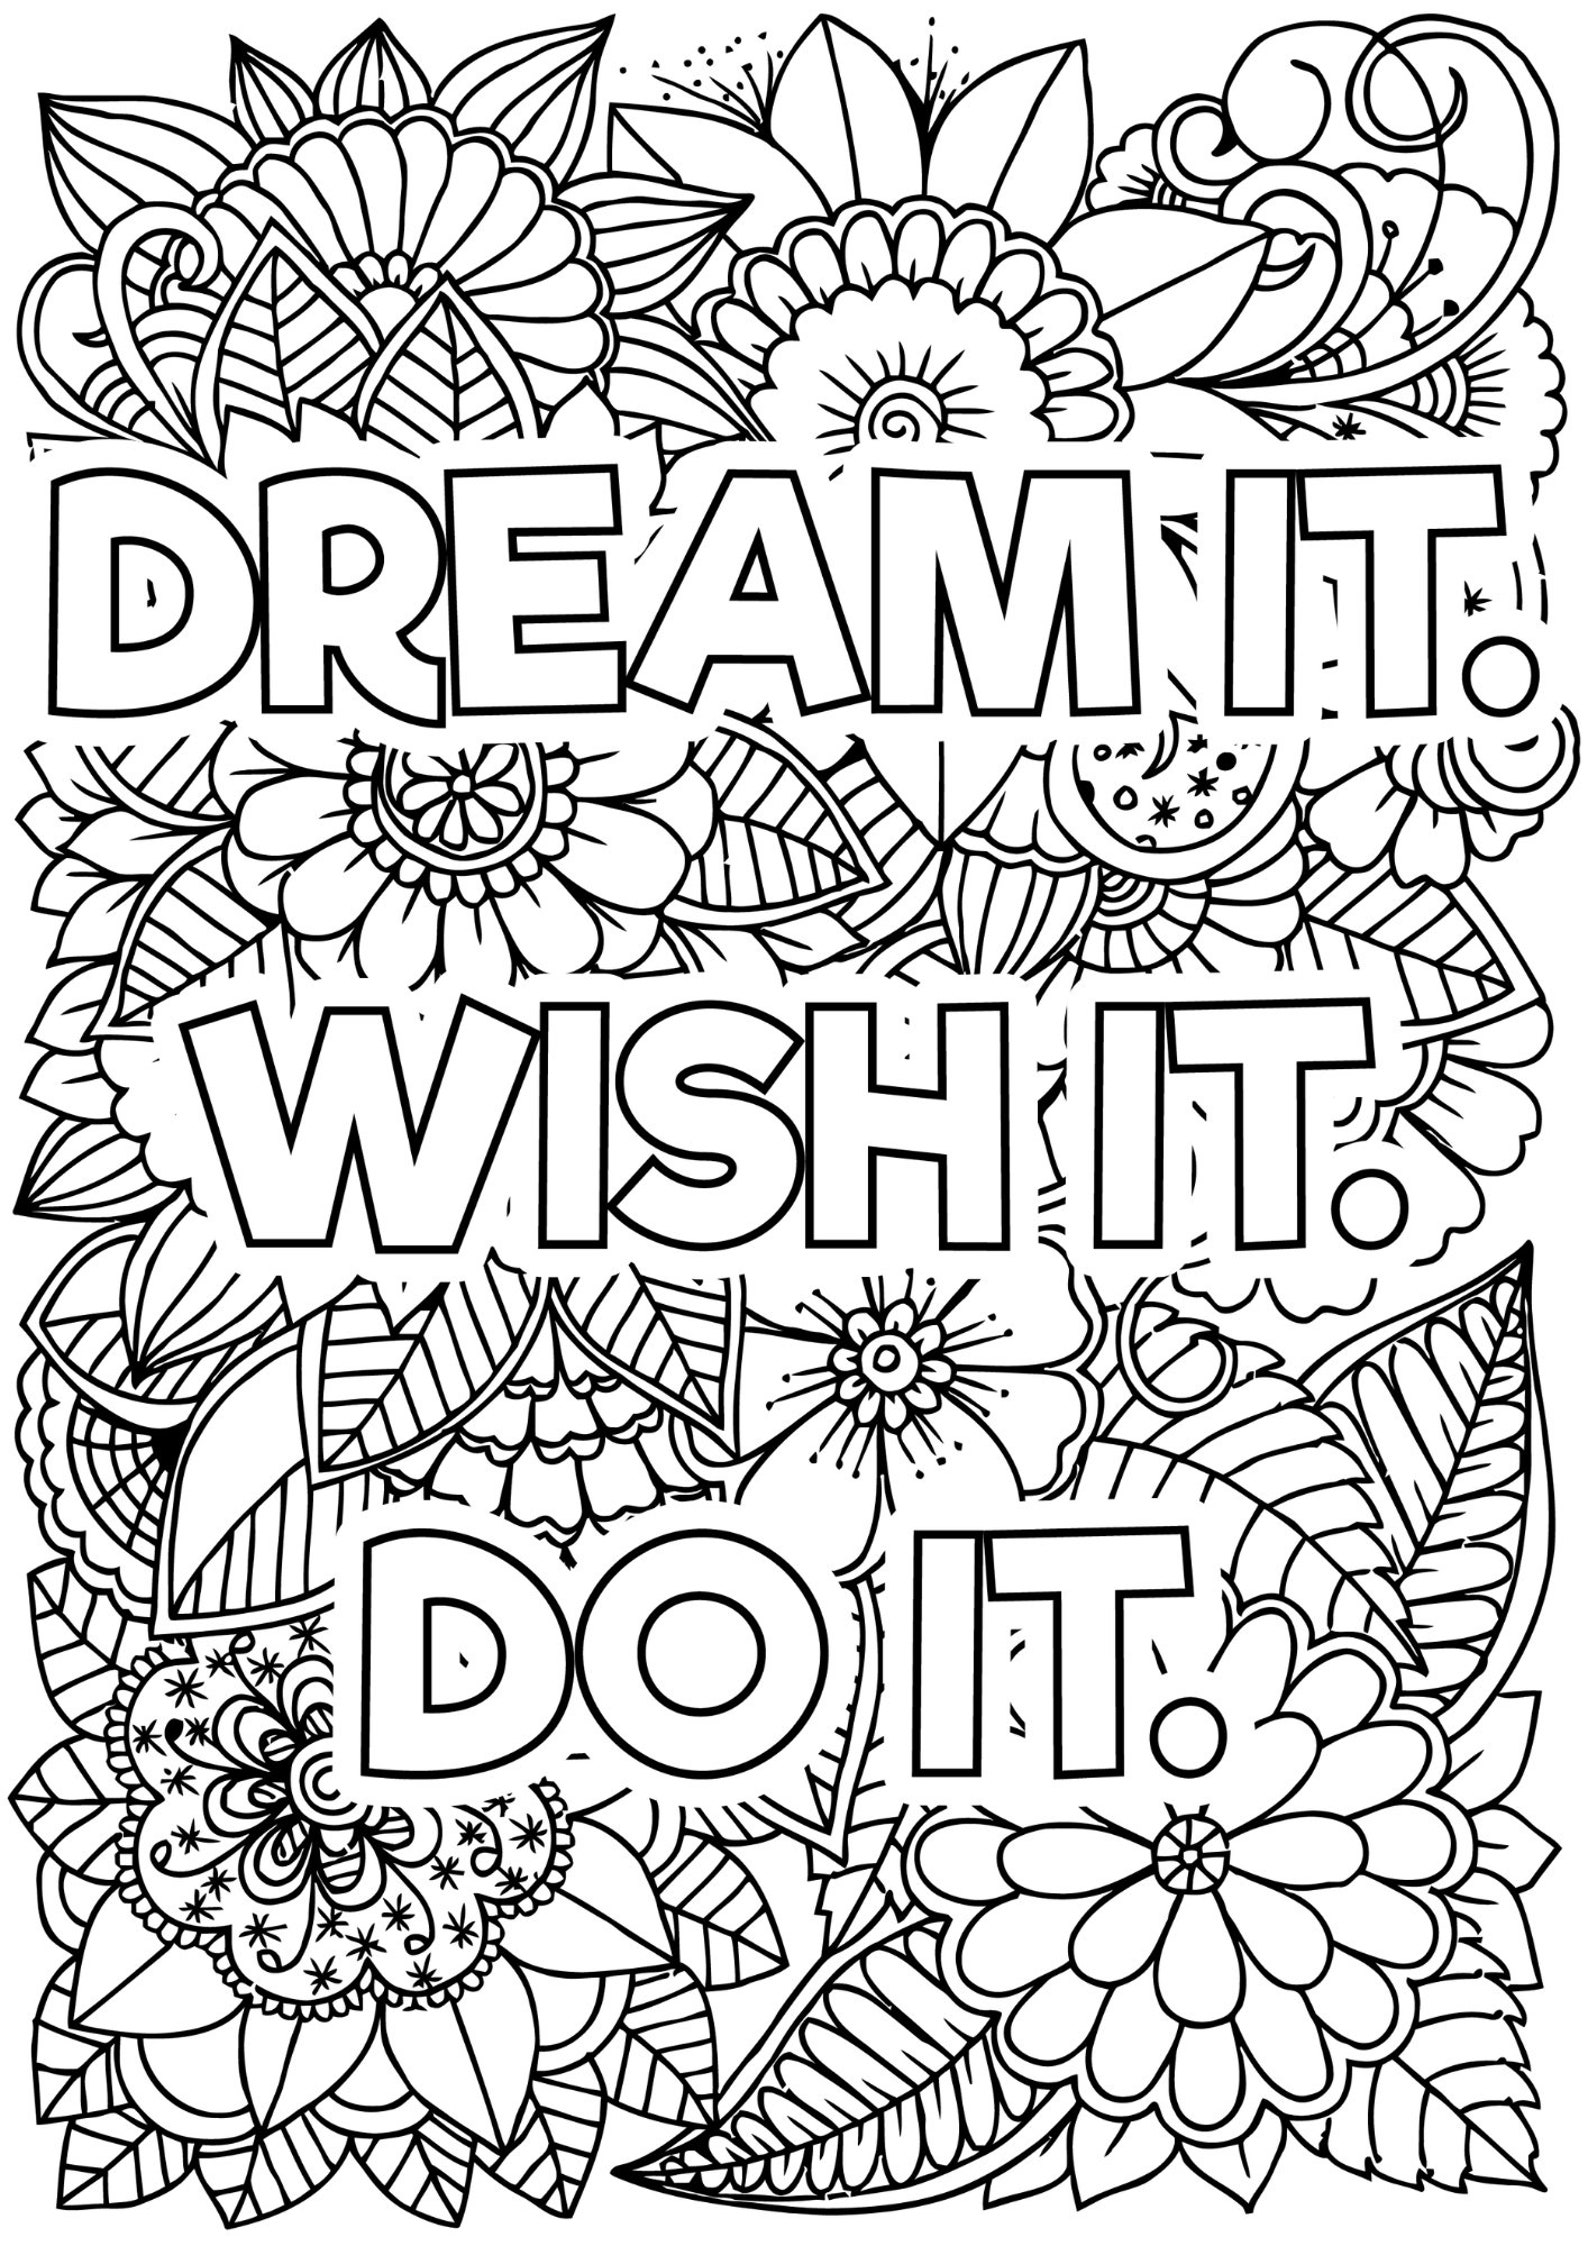 Motivational Coloring Pages For Kids 21 Printable Motivational Coloring
Pages For Kids